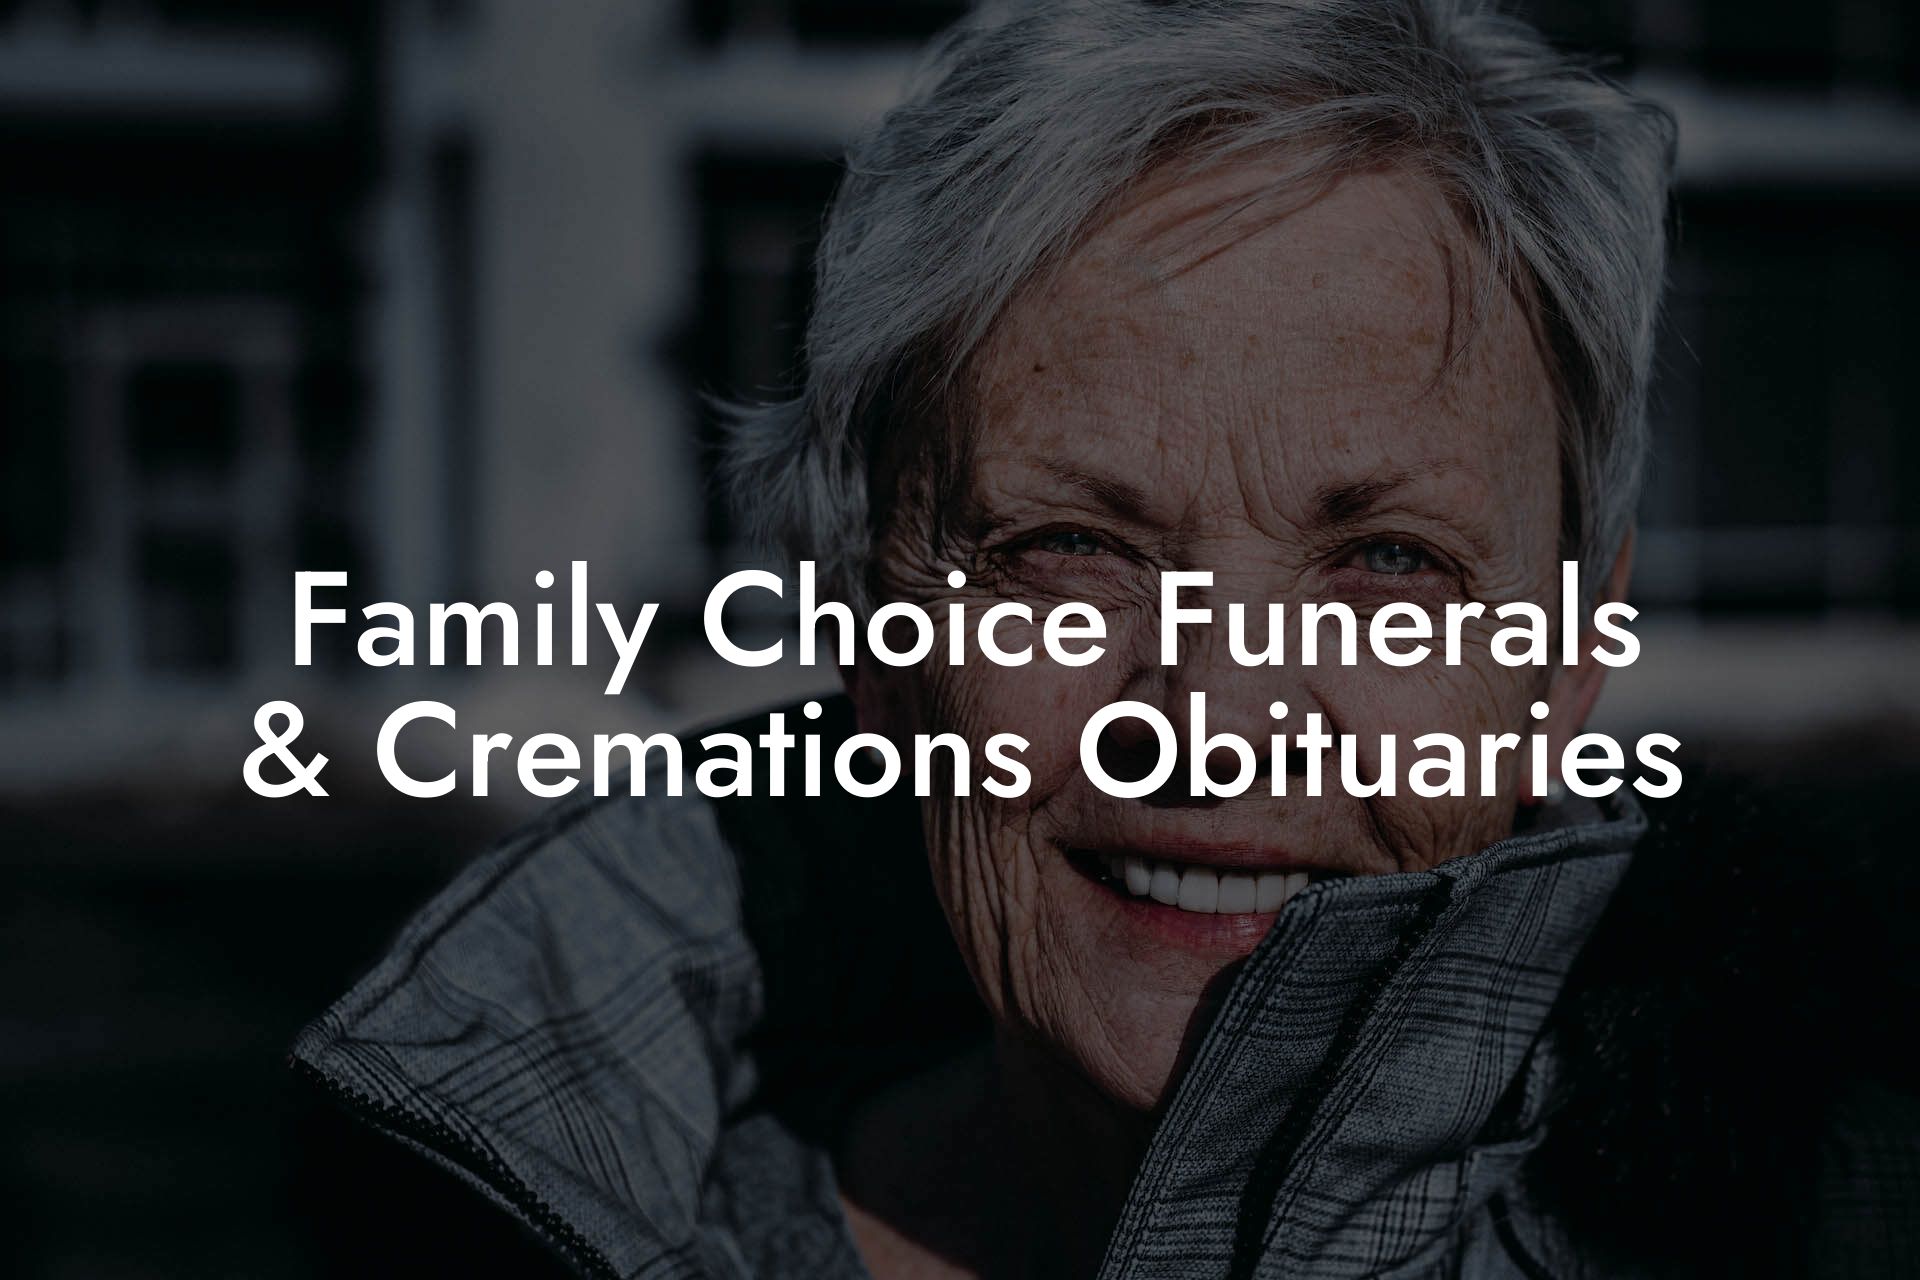 Family Choice Funerals & Cremations Obituaries